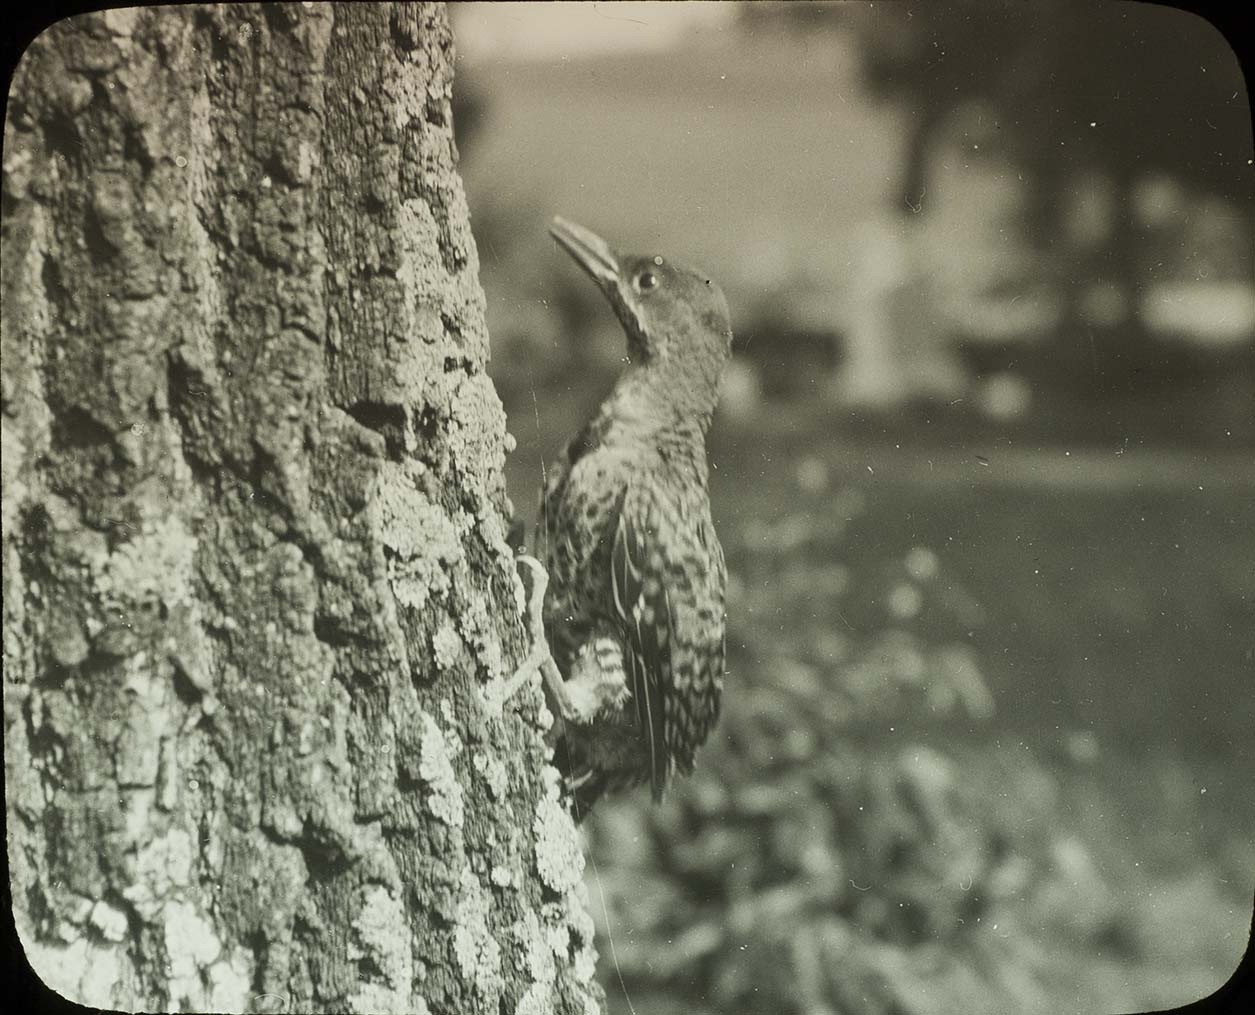 Lantern slide and photograph of a young Flicker clinging to a tree trunk